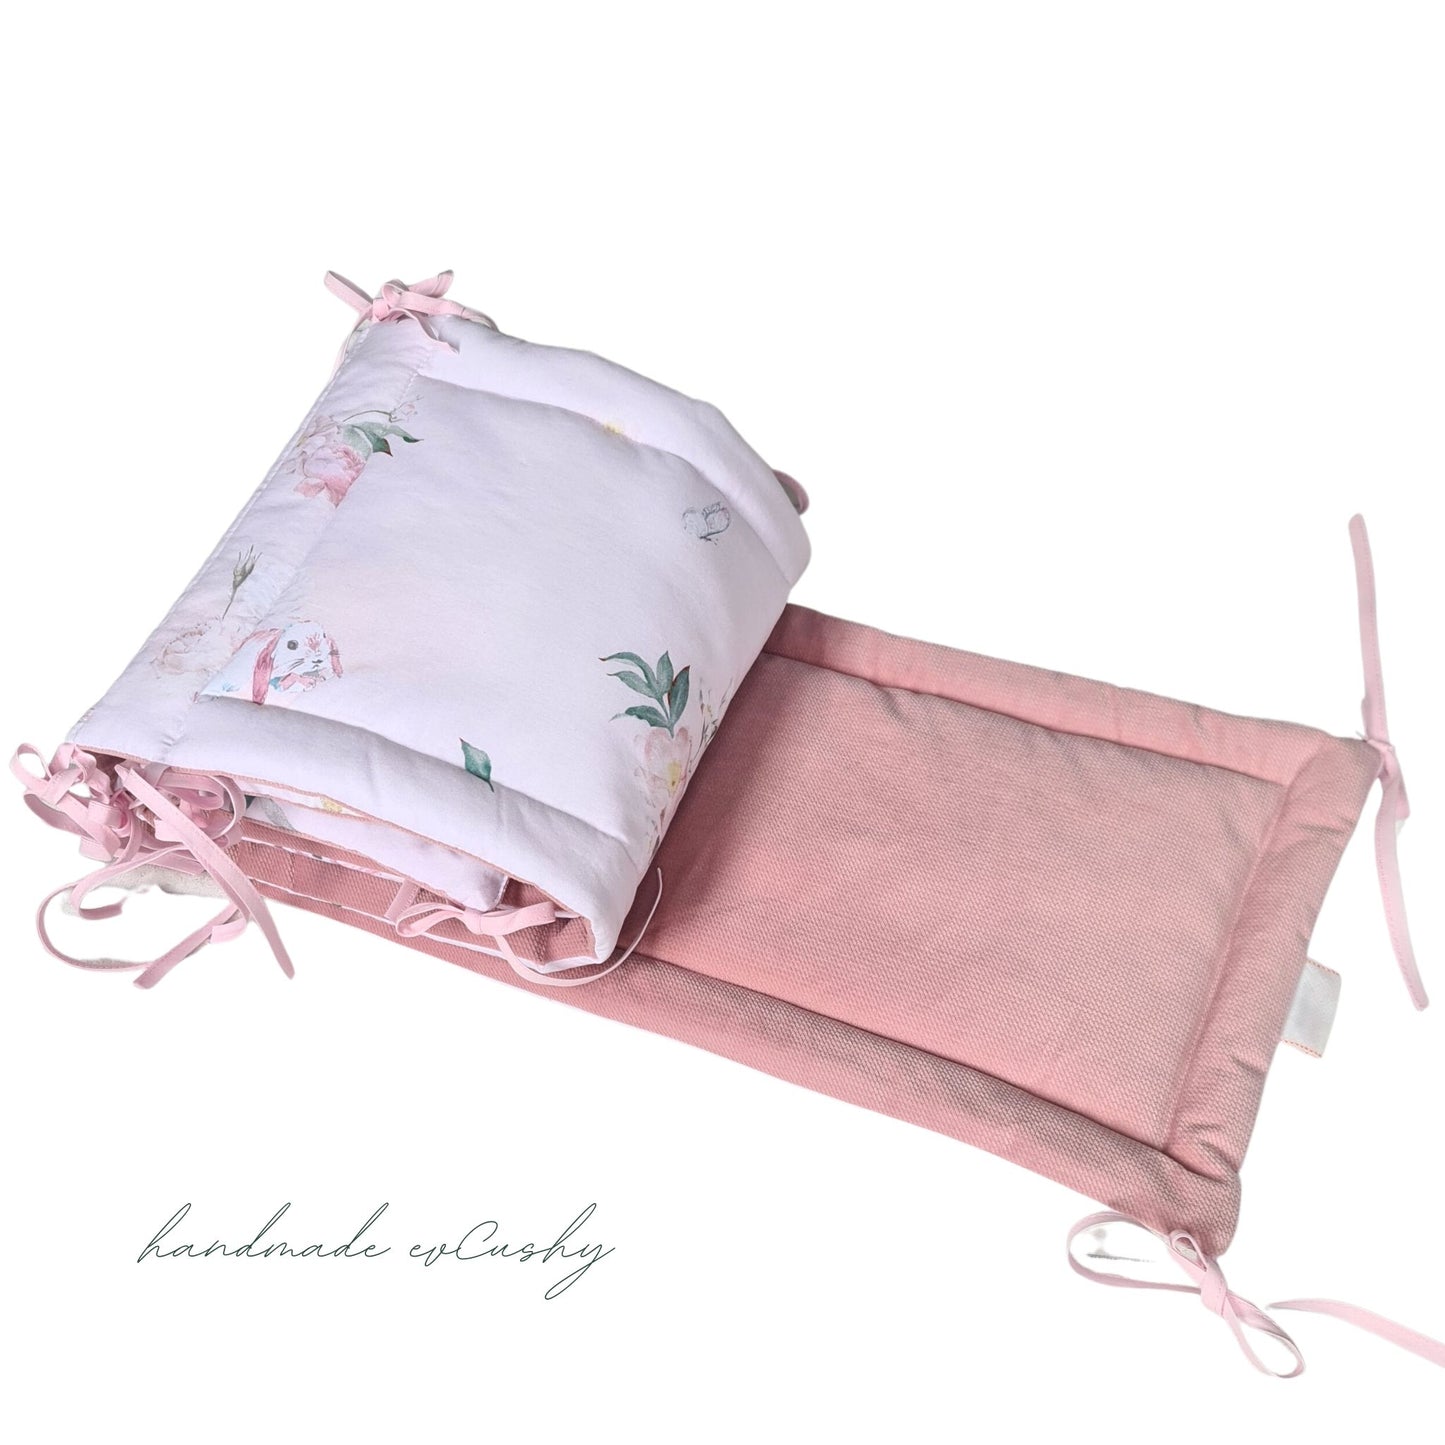 Image: 210cm Long Pink Cot Bed Bumper with Adorable Bunny Design and Pink Velvet